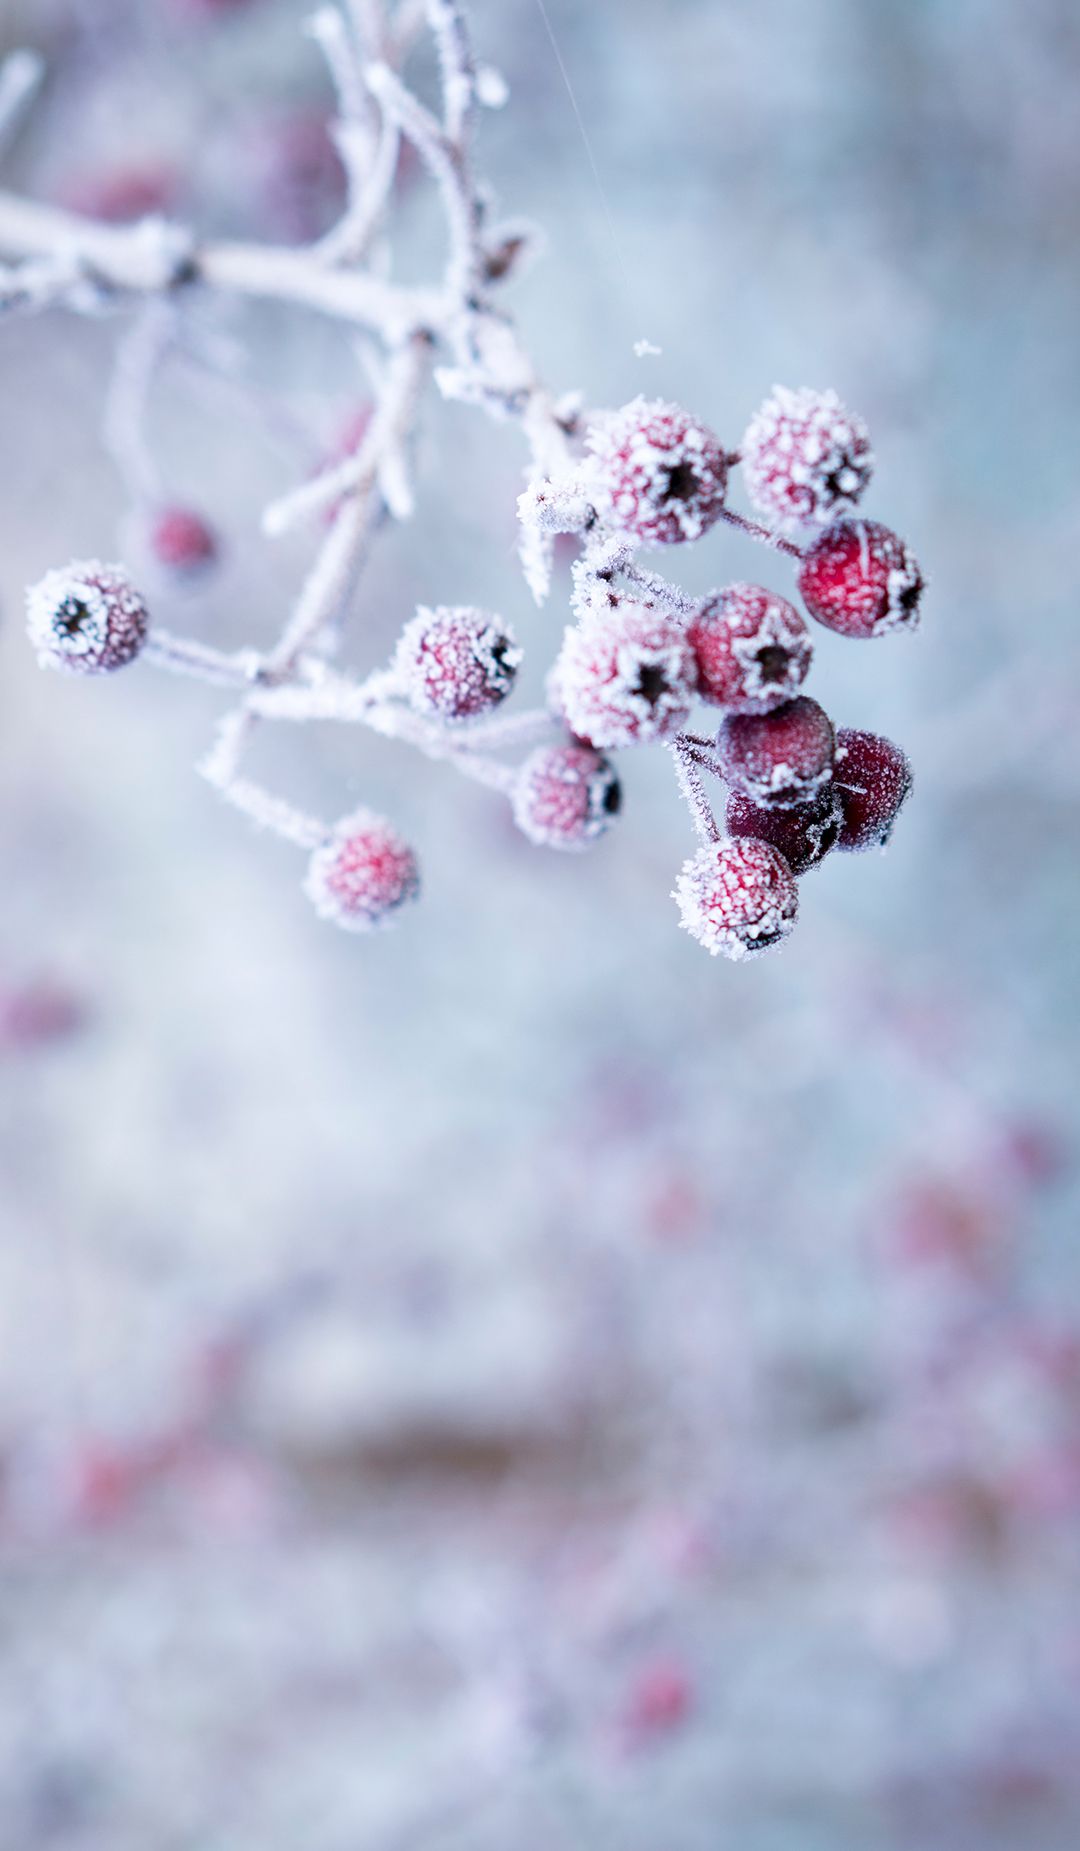 A tree with red berries on it - Snowflake